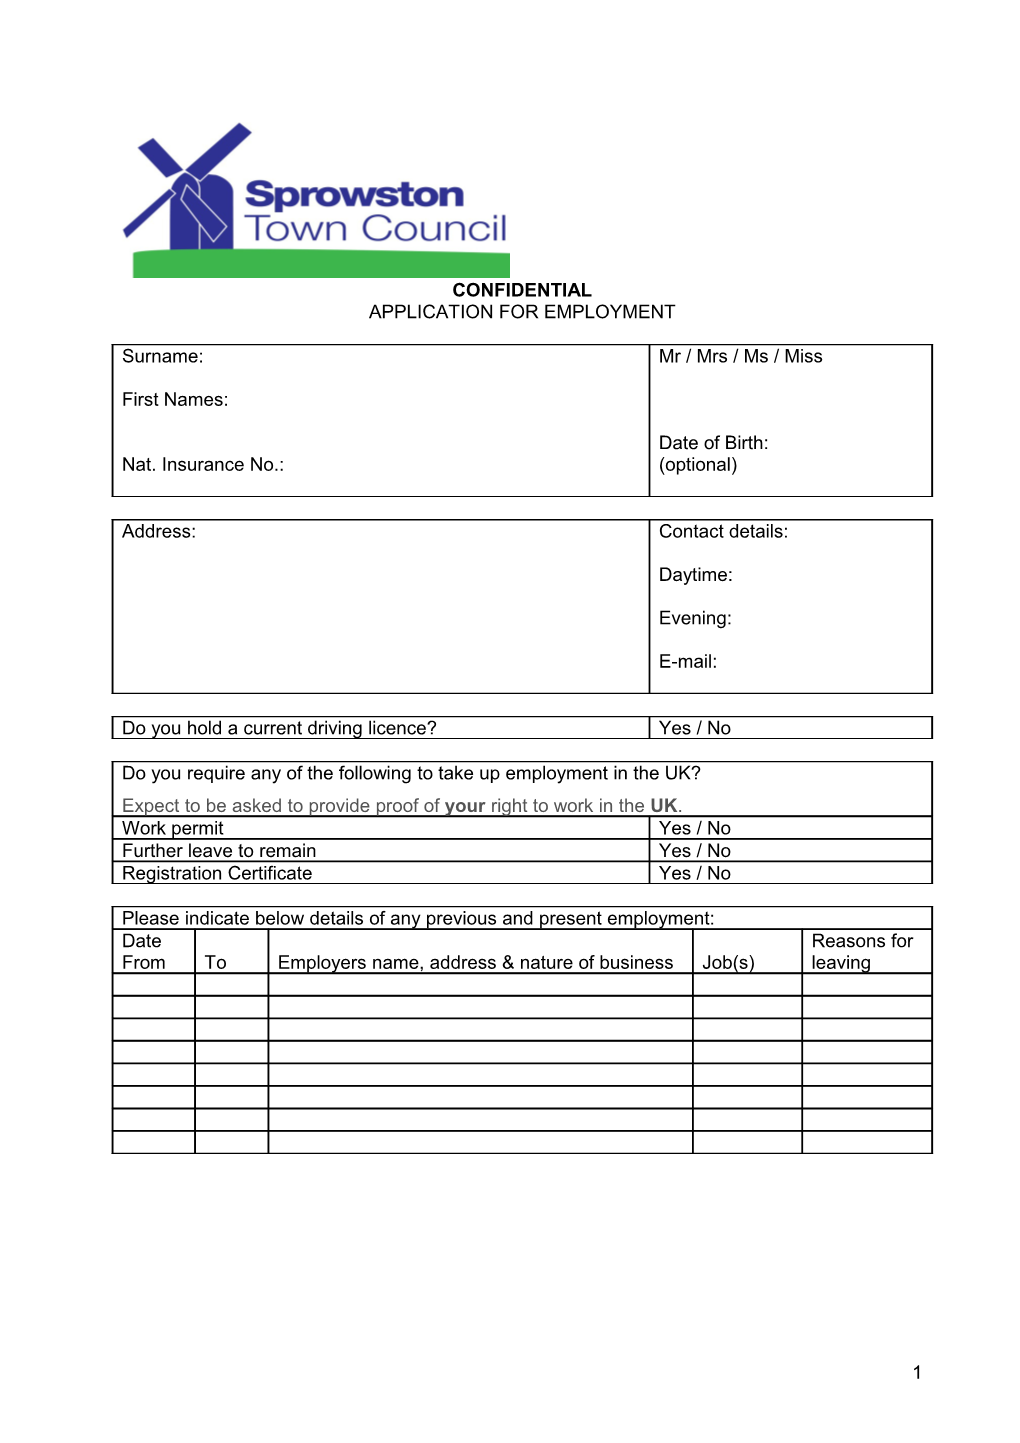 Application for Employment s61